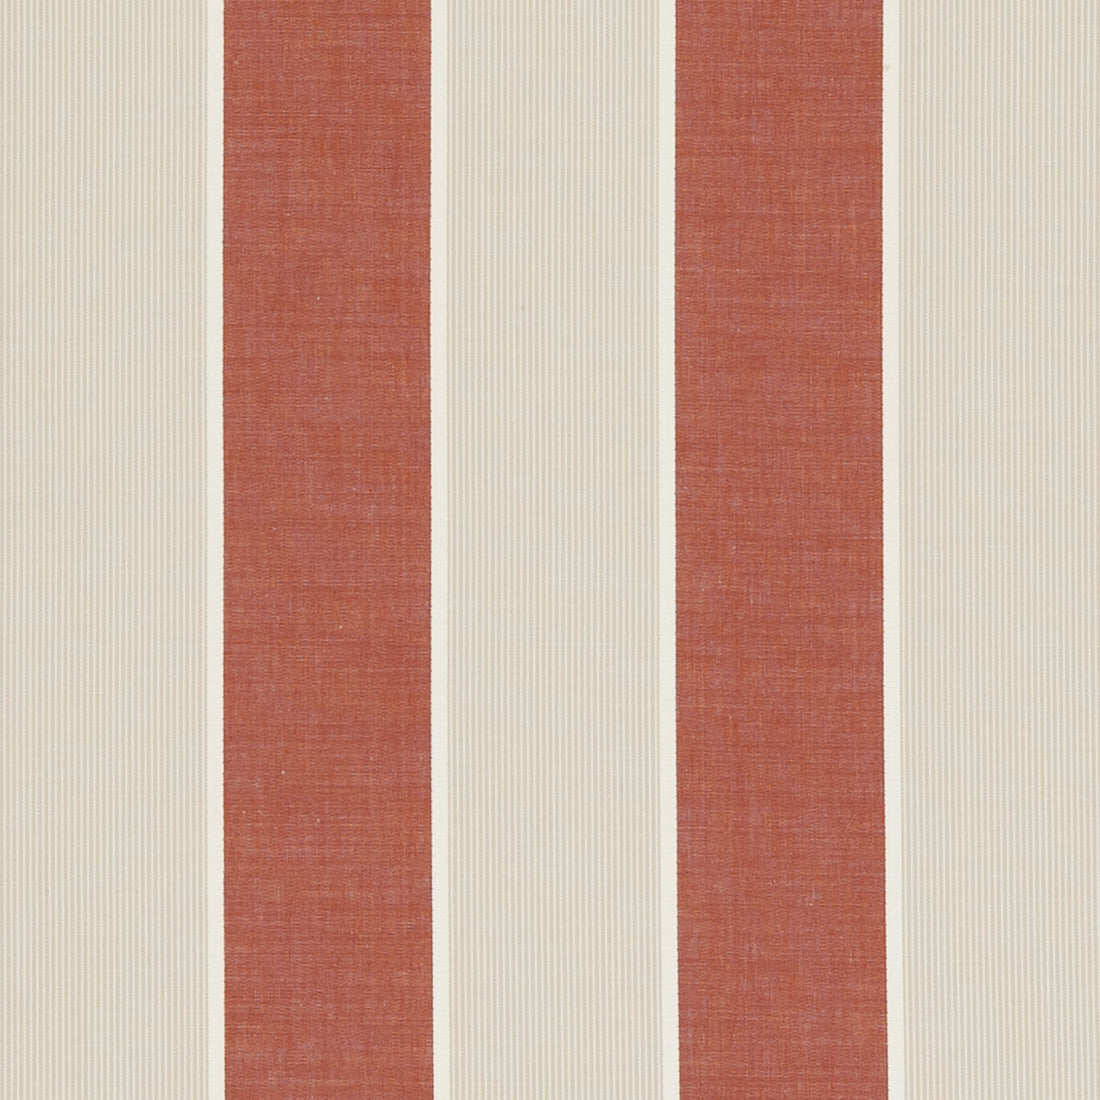 Chatburn fabric in spice color - pattern F0597/06.CAC.0 - by Clarke And Clarke in the Clarke &amp; Clarke Ribble Valley collection